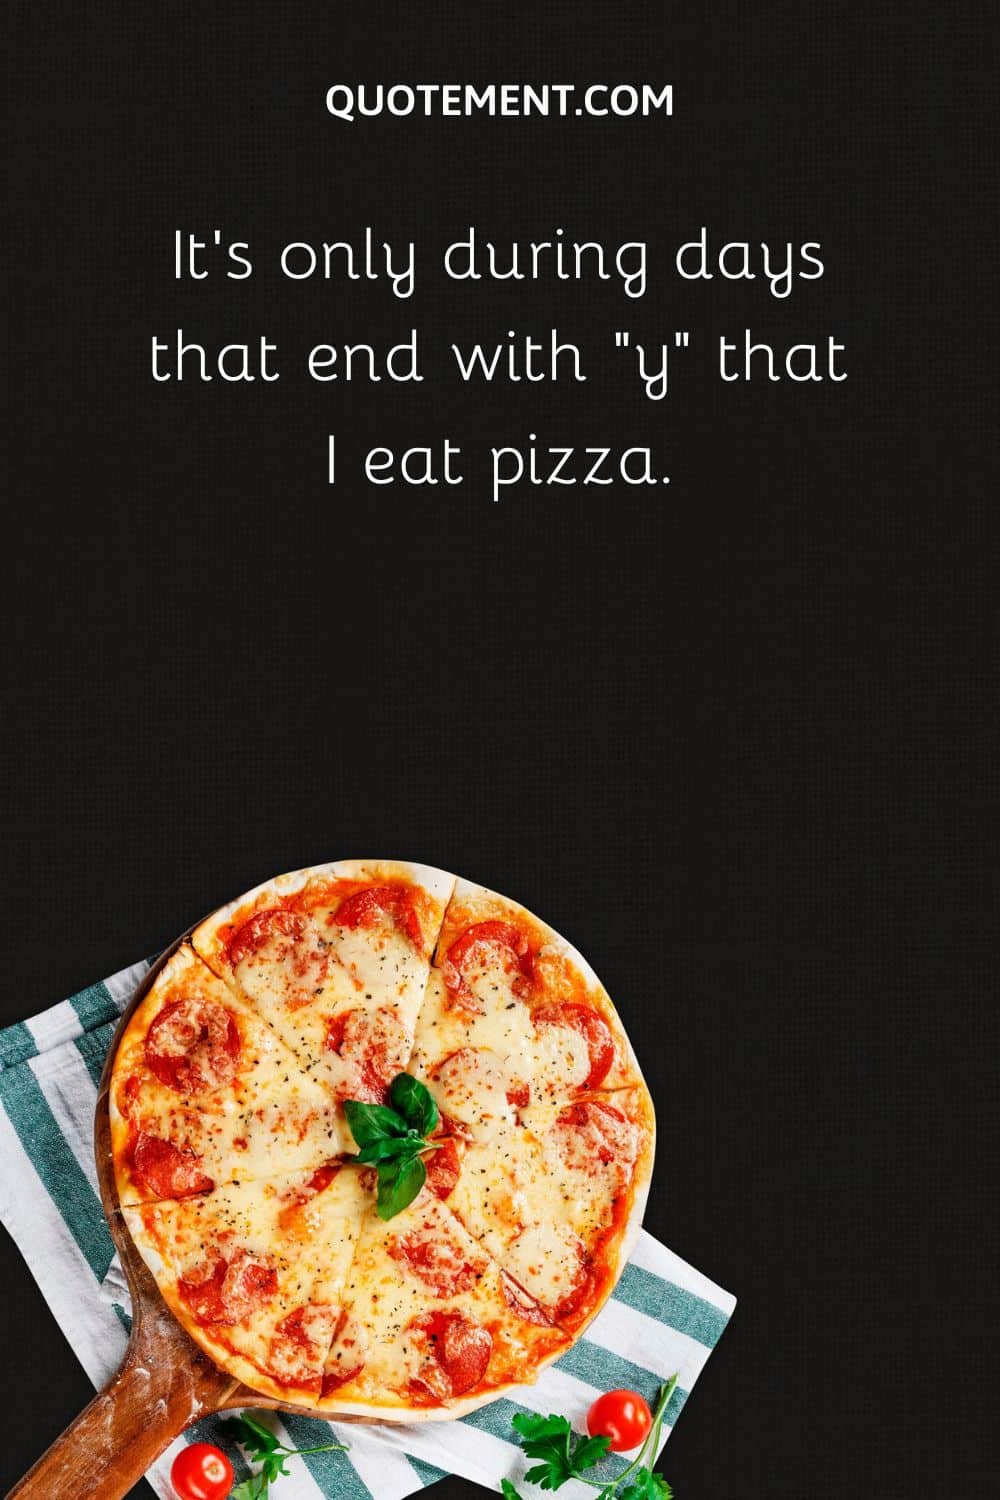 It’s only during days that end with “y” that I eat pizza